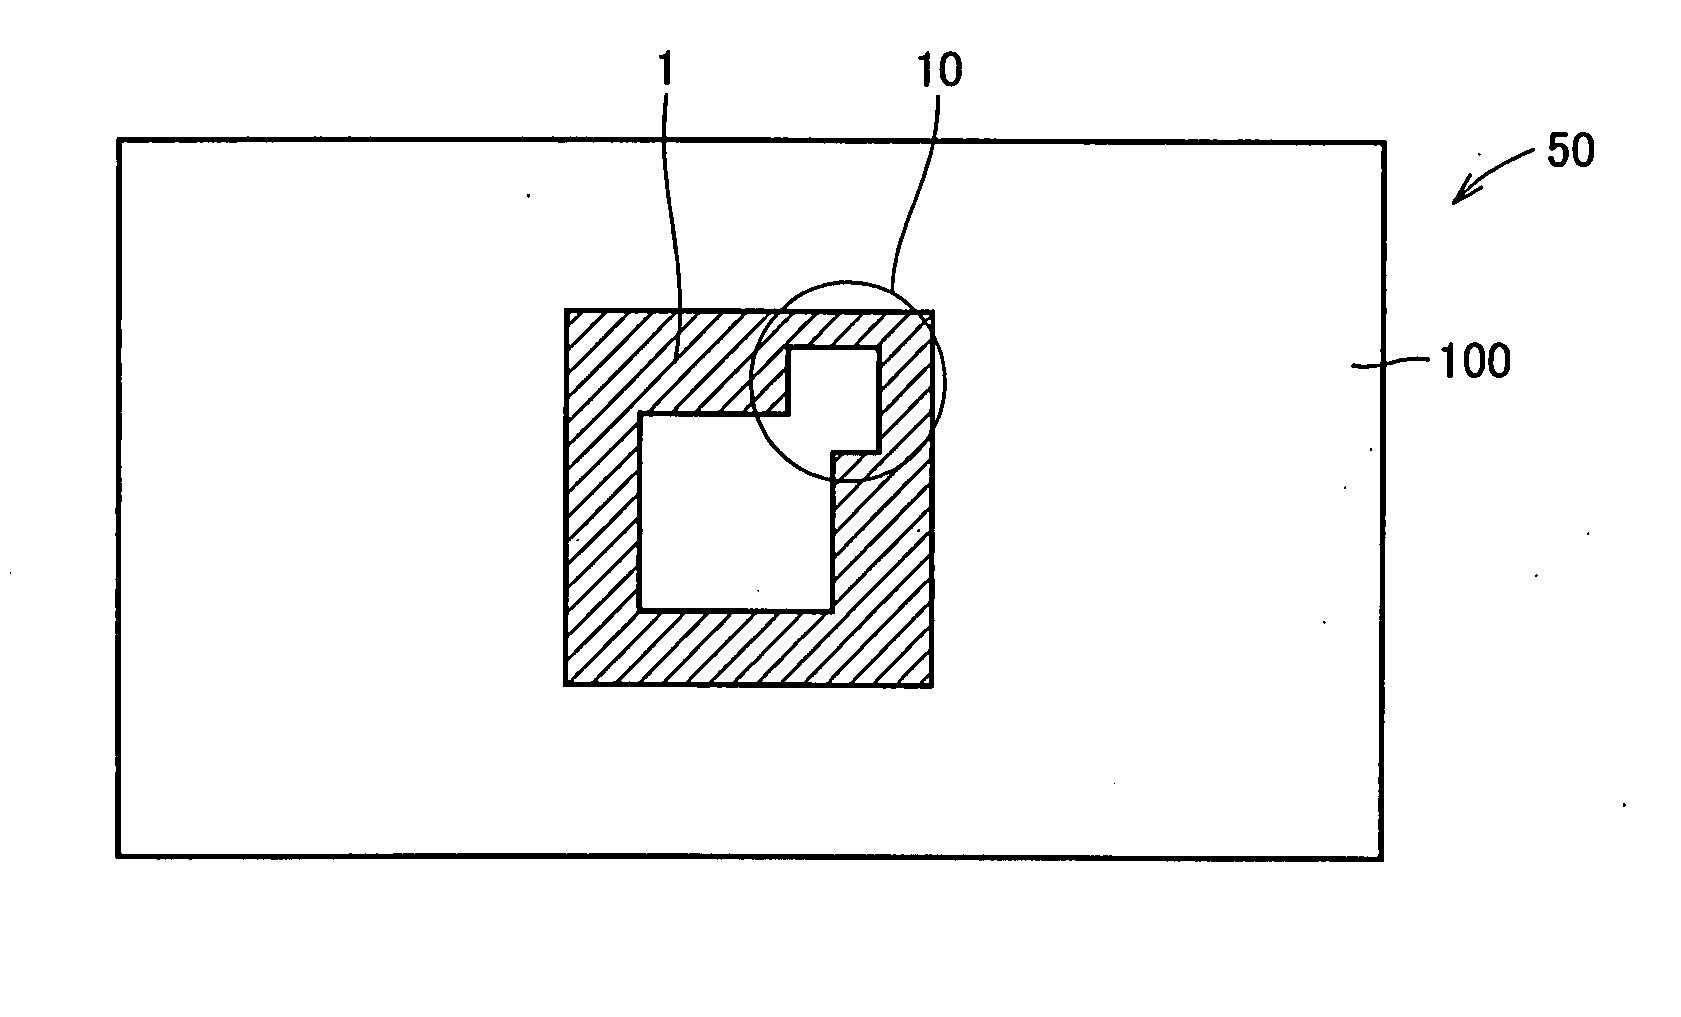 Photomask, and method and apparatus for producing the same